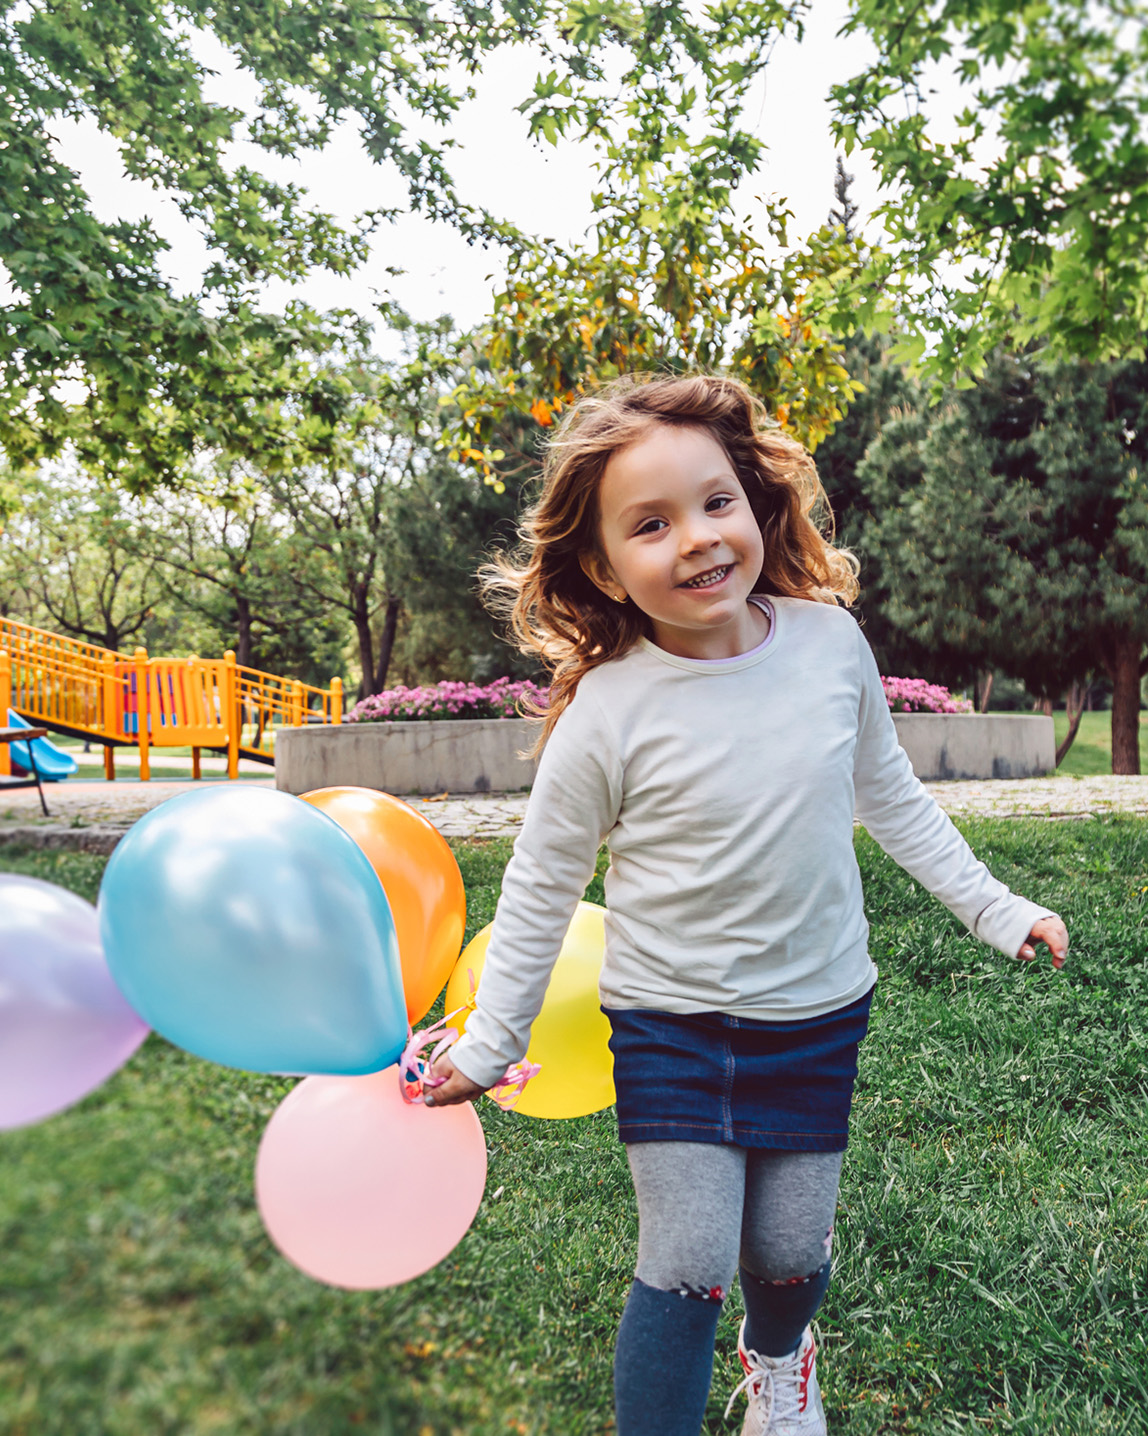 Happy Child Running with Balloons.